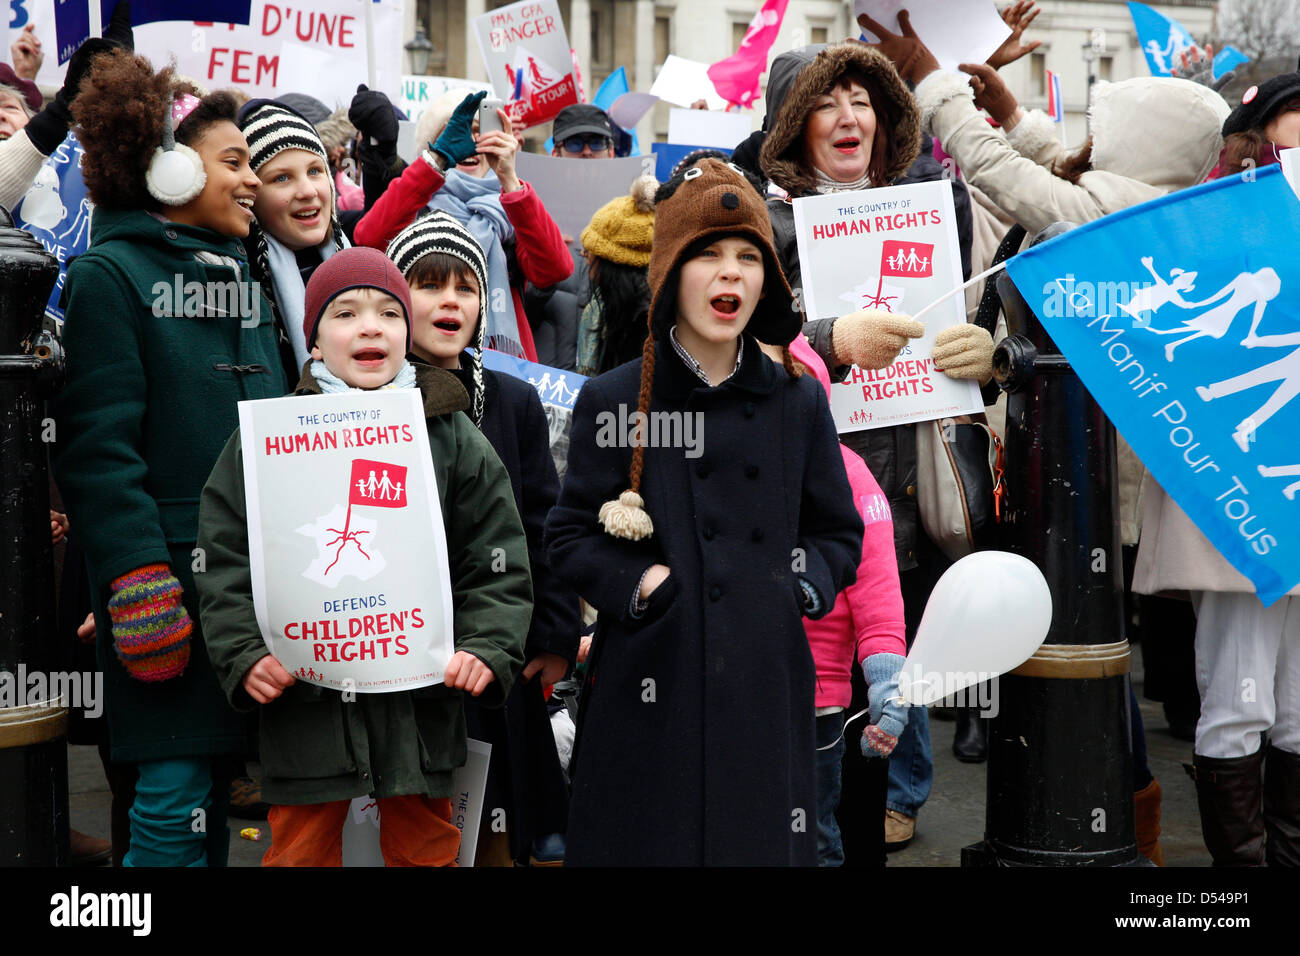 London, UK. 24th March, 2013.  Children and protesters chanting slogans against gay marriage. French protesters alongside religious groups are organising an Anti-Gay rally in Trafalgar Square.  Anglican Mainstream are urging Christians to turn up to protest Stock Photo